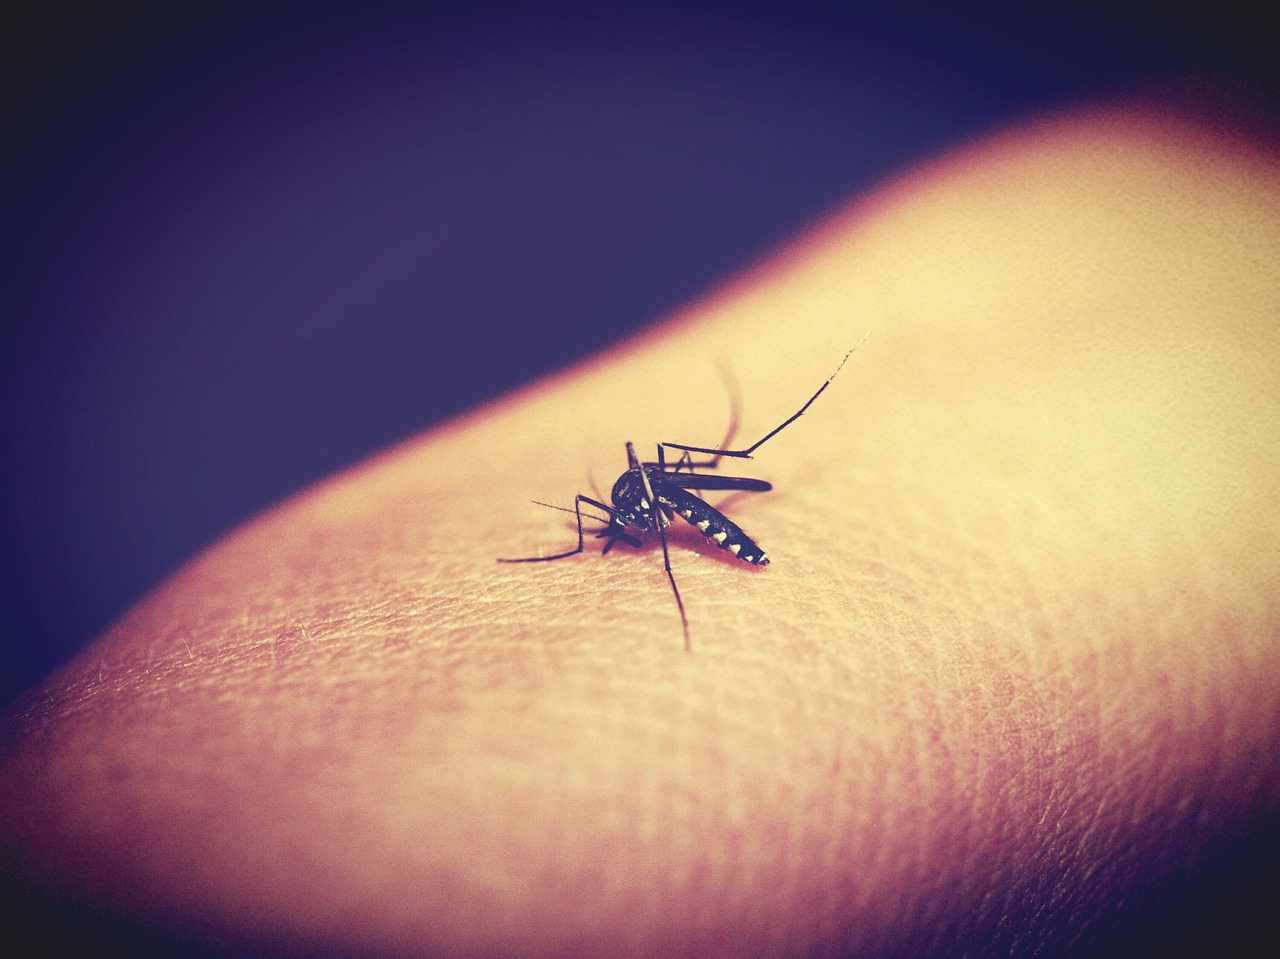 Dengue Vaccine Will Be Available Next Week - Who Can Benefit from It?